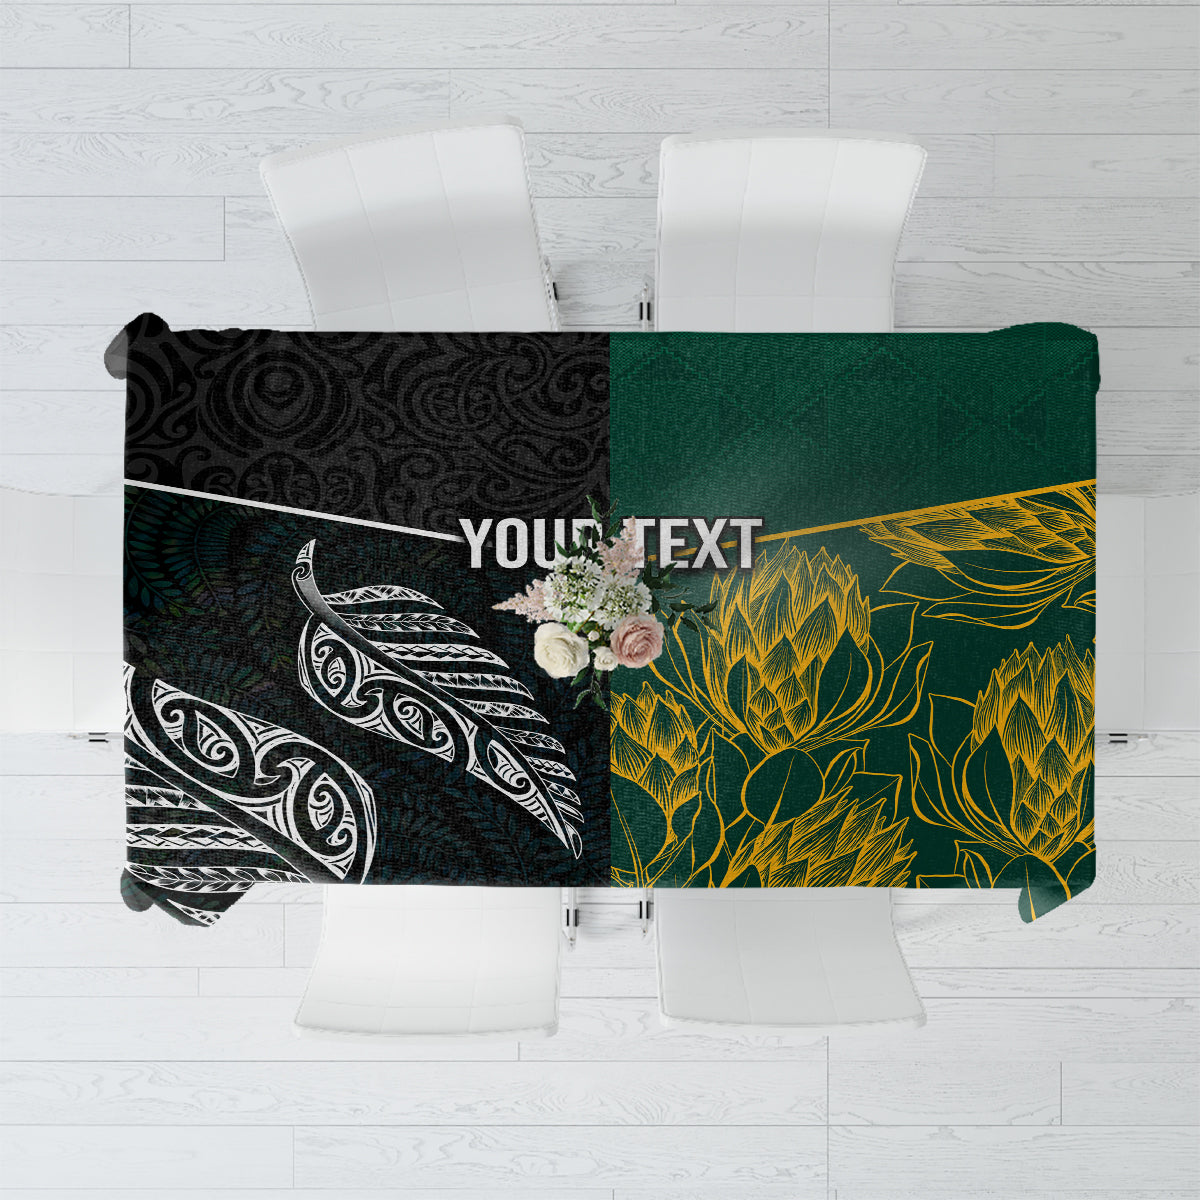 Personalised South Africa and New Zealand Tablecloth King Protea and Silver Fern Mix Culture Pattern LT03 Black - Polynesian Pride